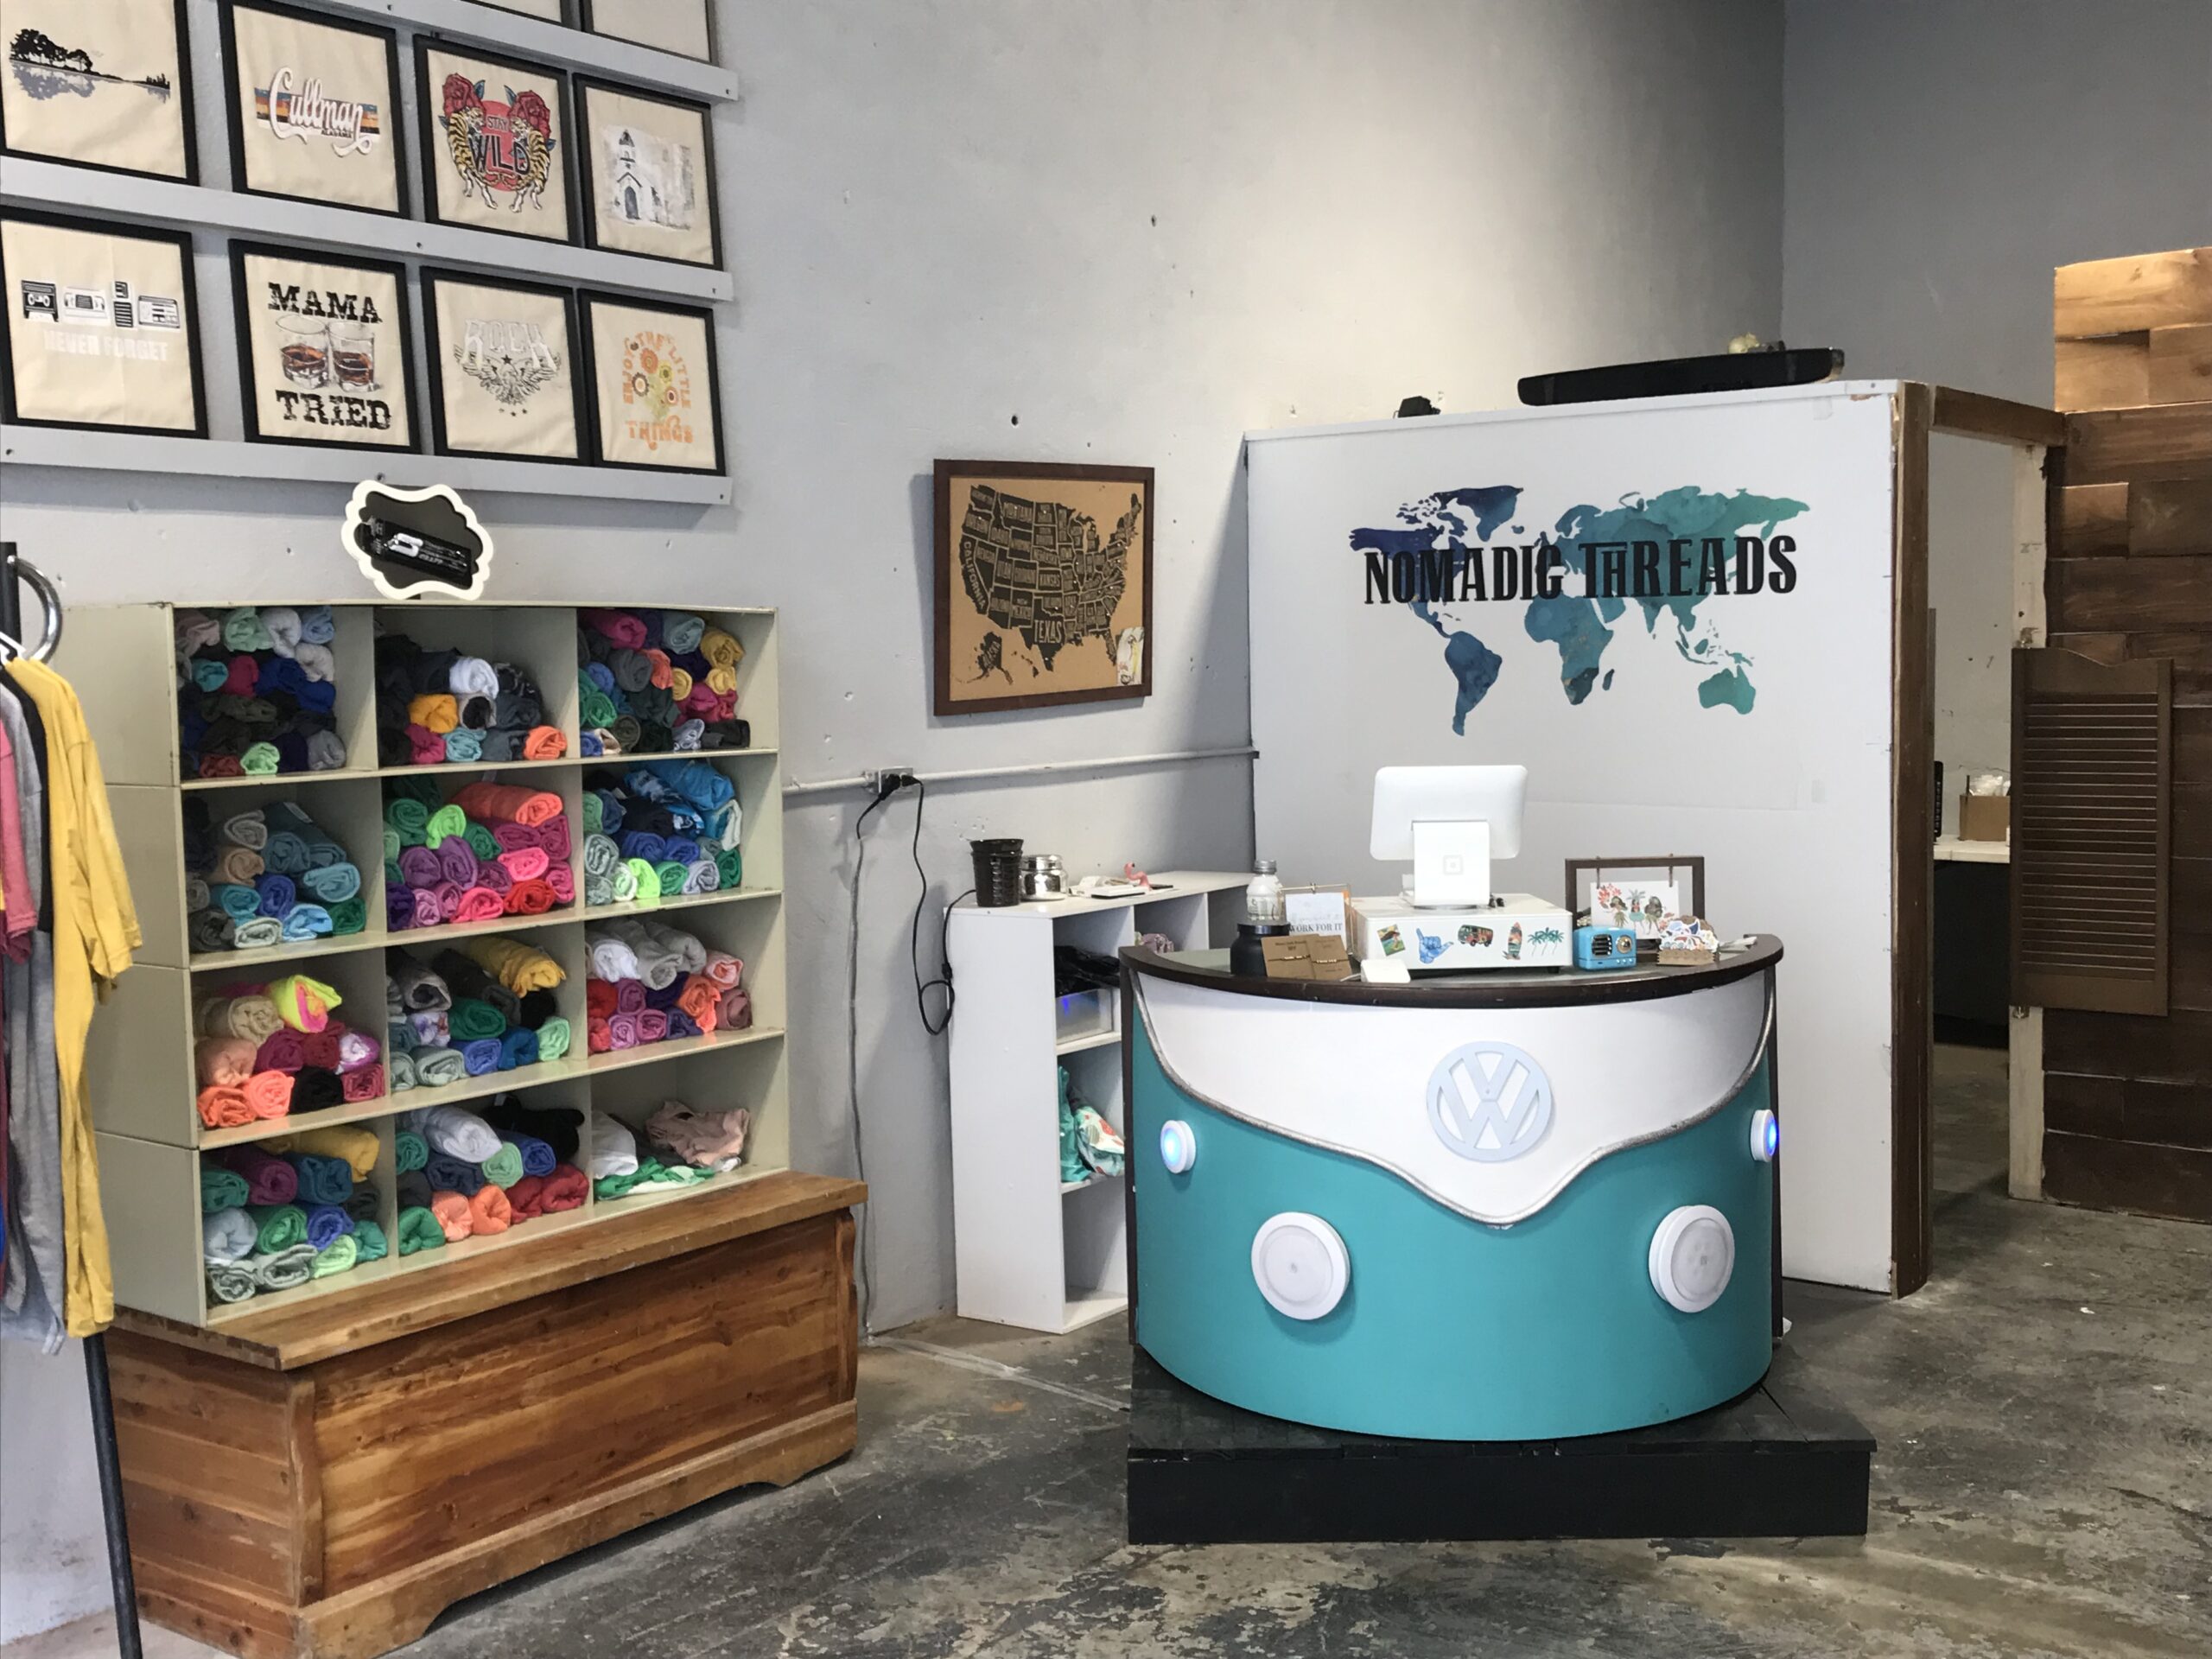 The Warehouse District’s Nomadic Threads holding grand opening today